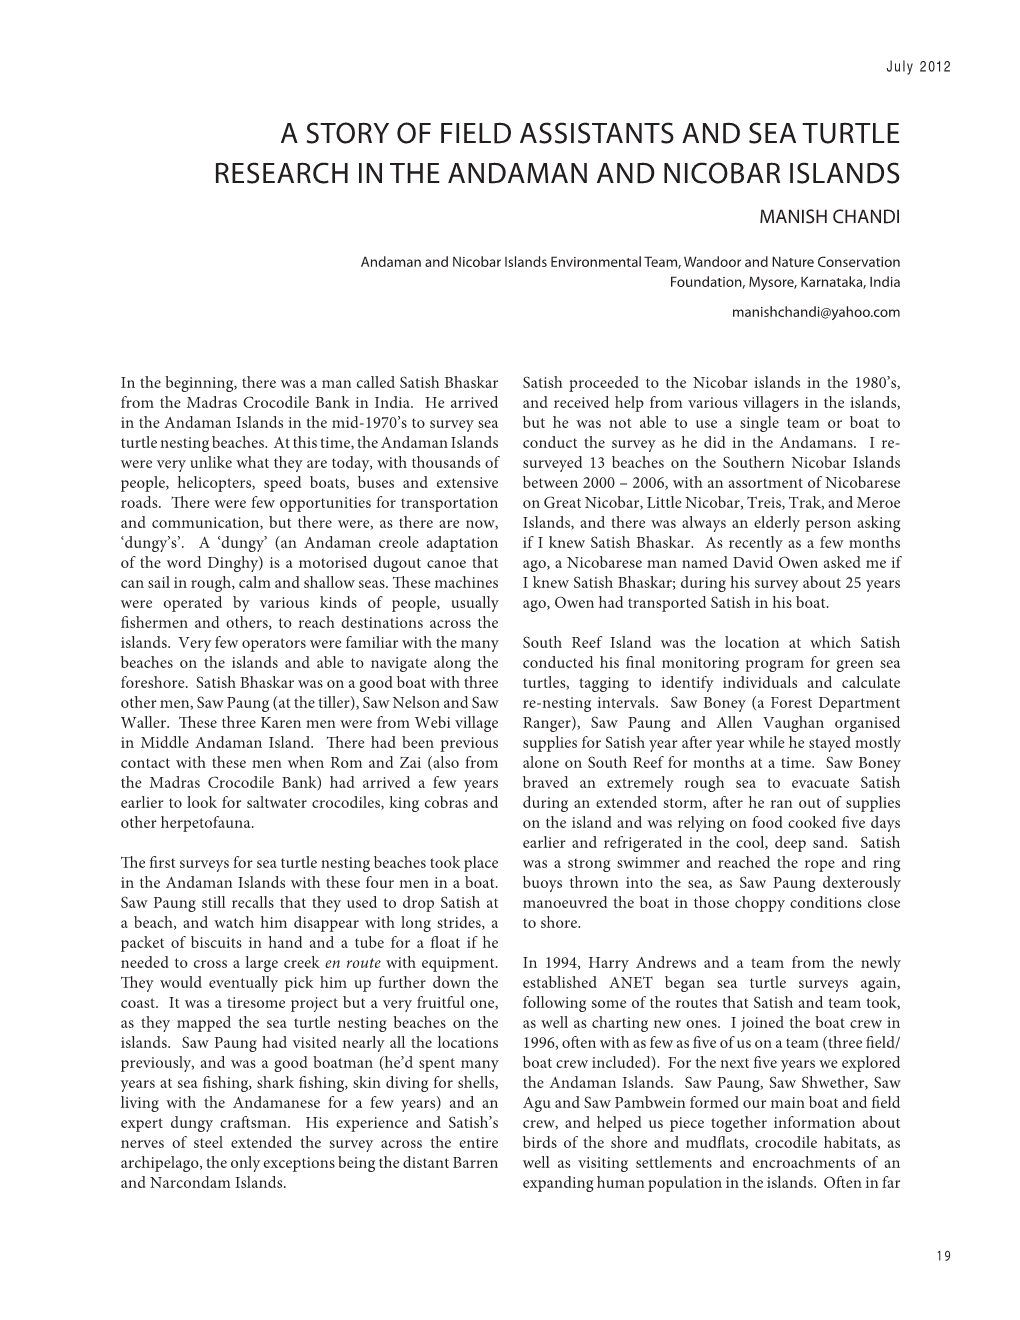 A Story of Field Assistants and Sea Turtle Research in the Andaman and Nicobar Islands Manish Chandi